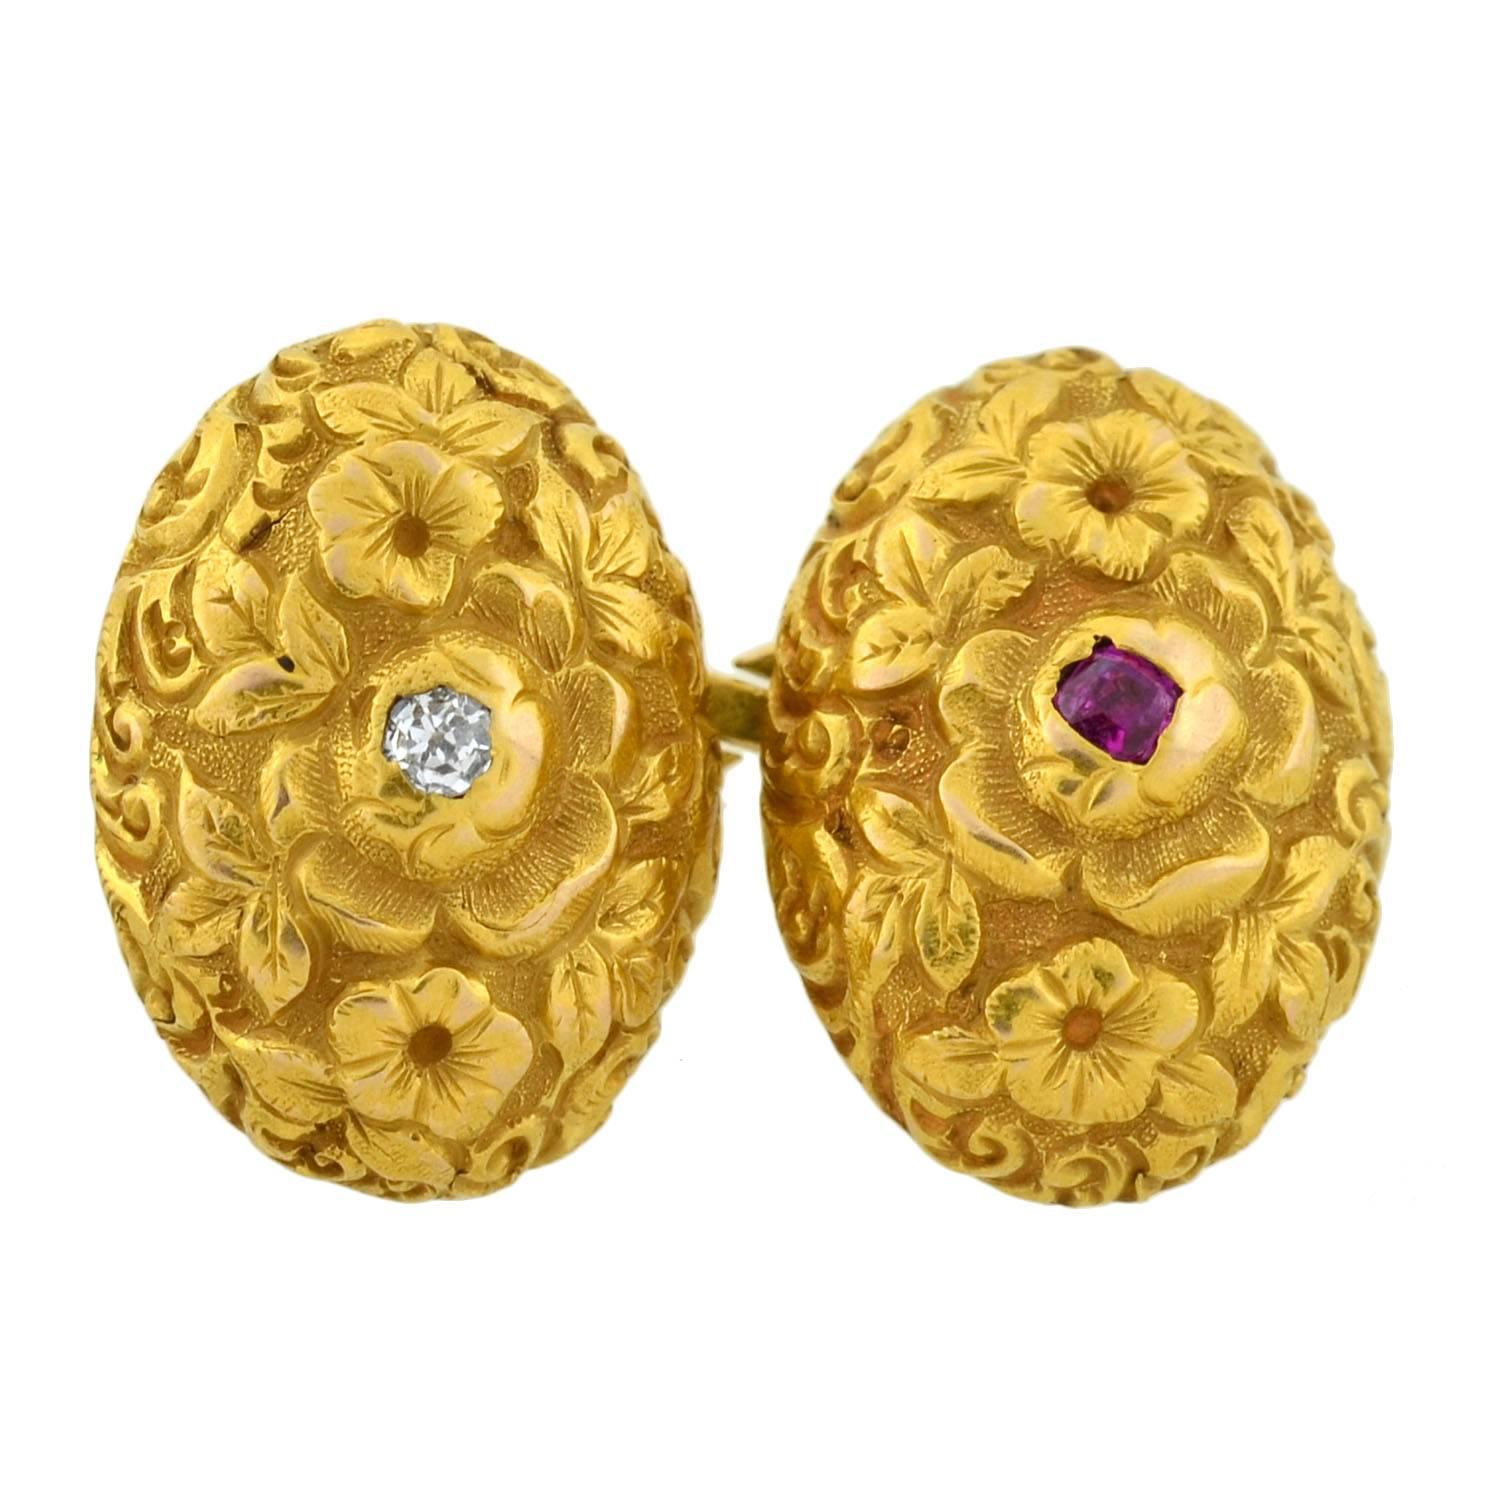 A beautiful pair of gemstone cufflinks from the Art Nouveau (ca1900) era! Crafted in vibrant 14kt gold, these double-sided cufflinks are bursting with detail. Each oval cufflink face is covered in textured repousse detail, forming a lovely floral